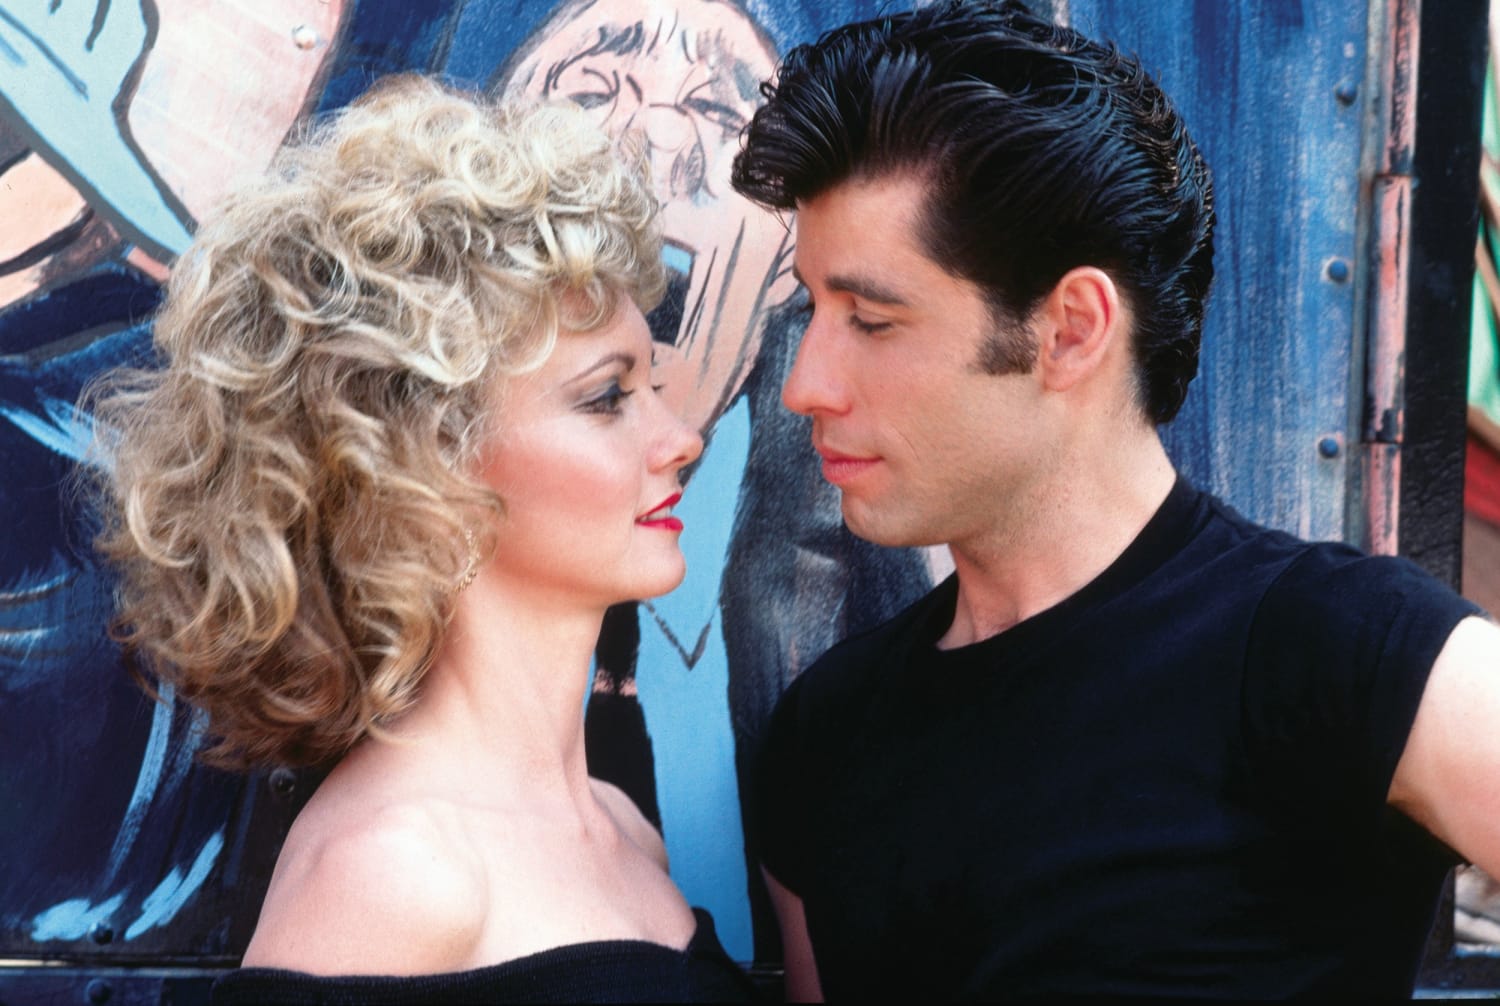 adjetivo compañerismo Perseo Grease' casting director shares the story of Olivia Newton-John and John  Travolta's 1st screen test